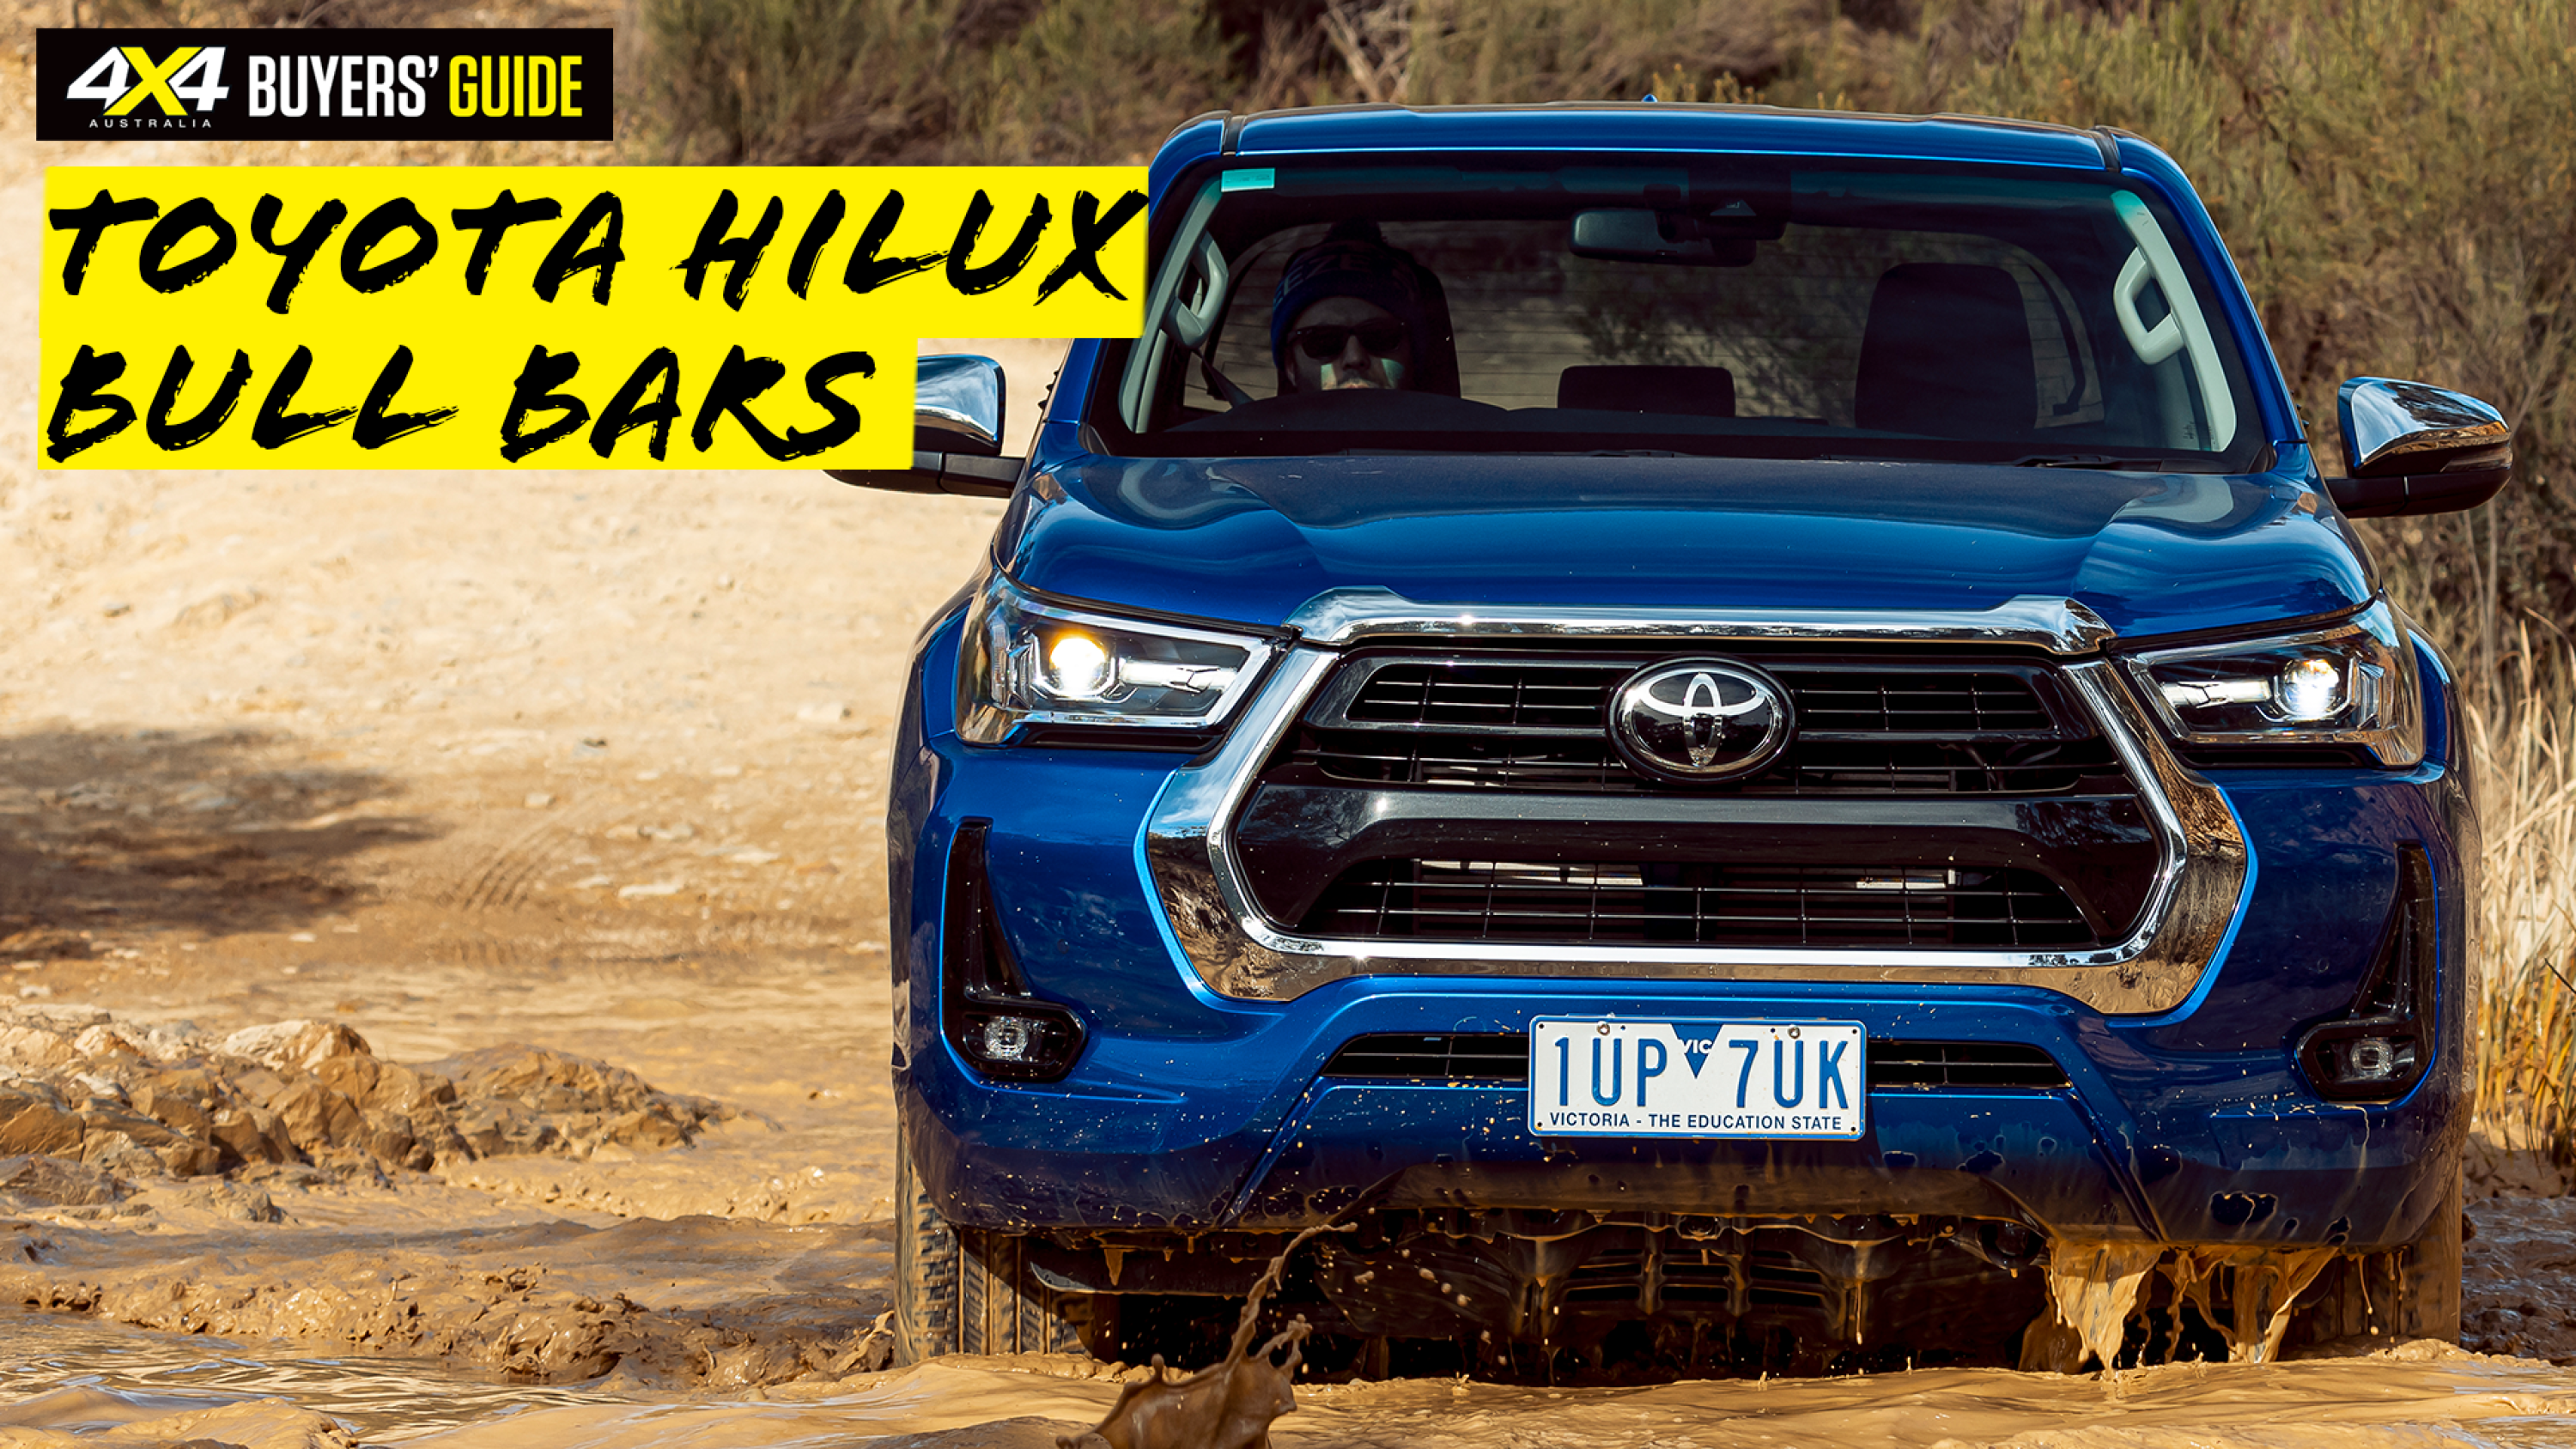 a26018bb/4x4 buyersguide hilux buyers guide bull bar png